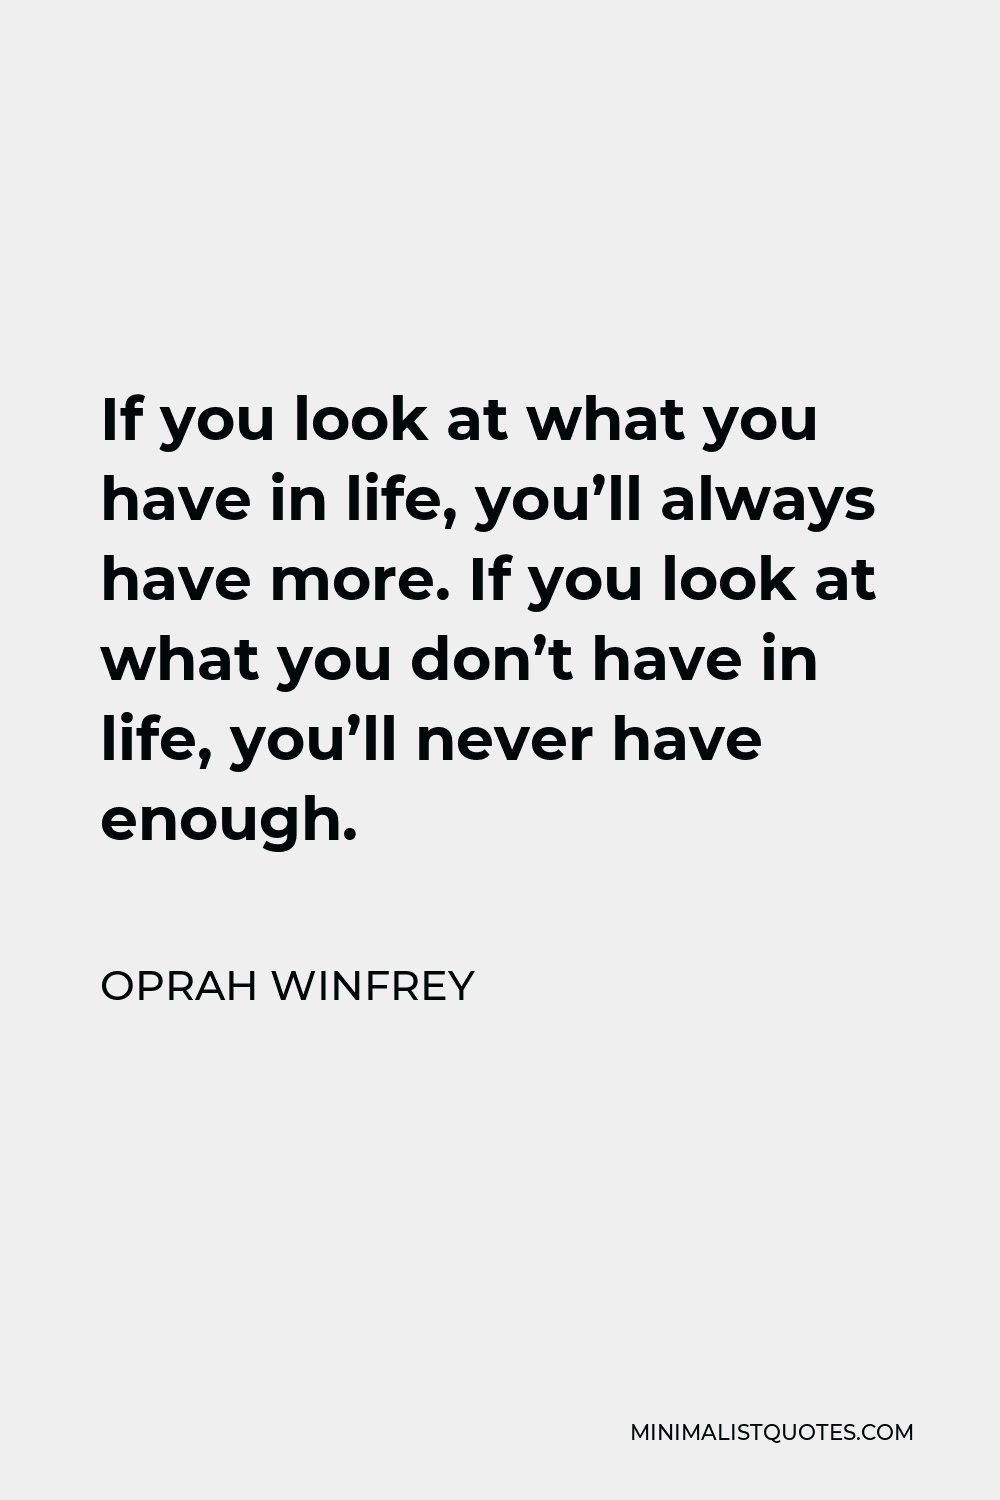 Oprah Winfrey Quote - If you look at what you have in life, you’ll always have more. If you look at what you don’t have in life, you’ll never have enough.